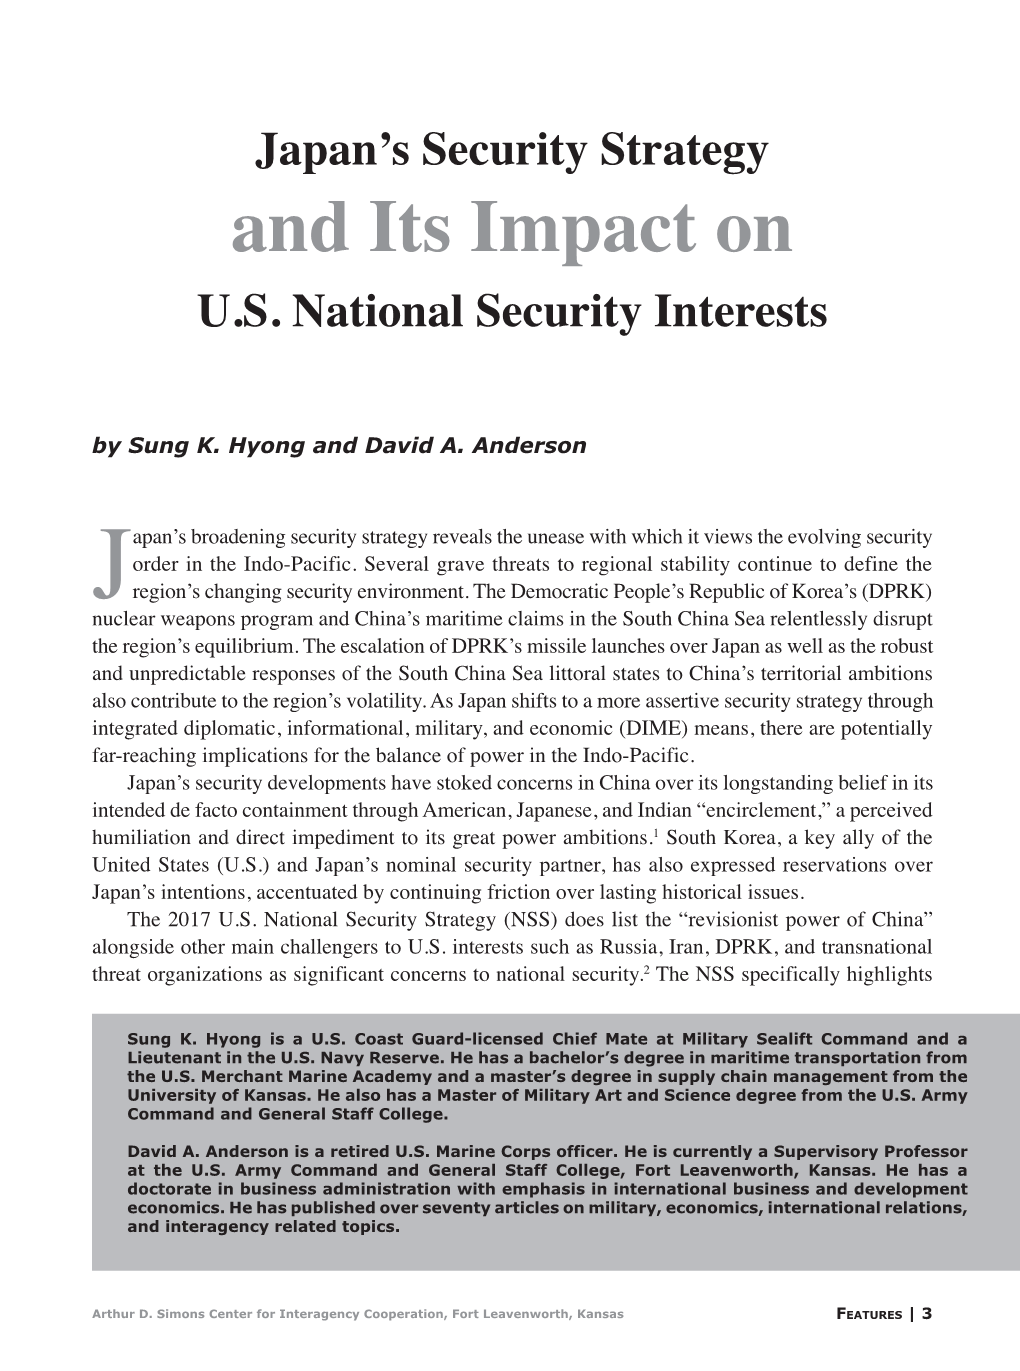 Japan's Security Strategy and Its Impact on U.S. National Security